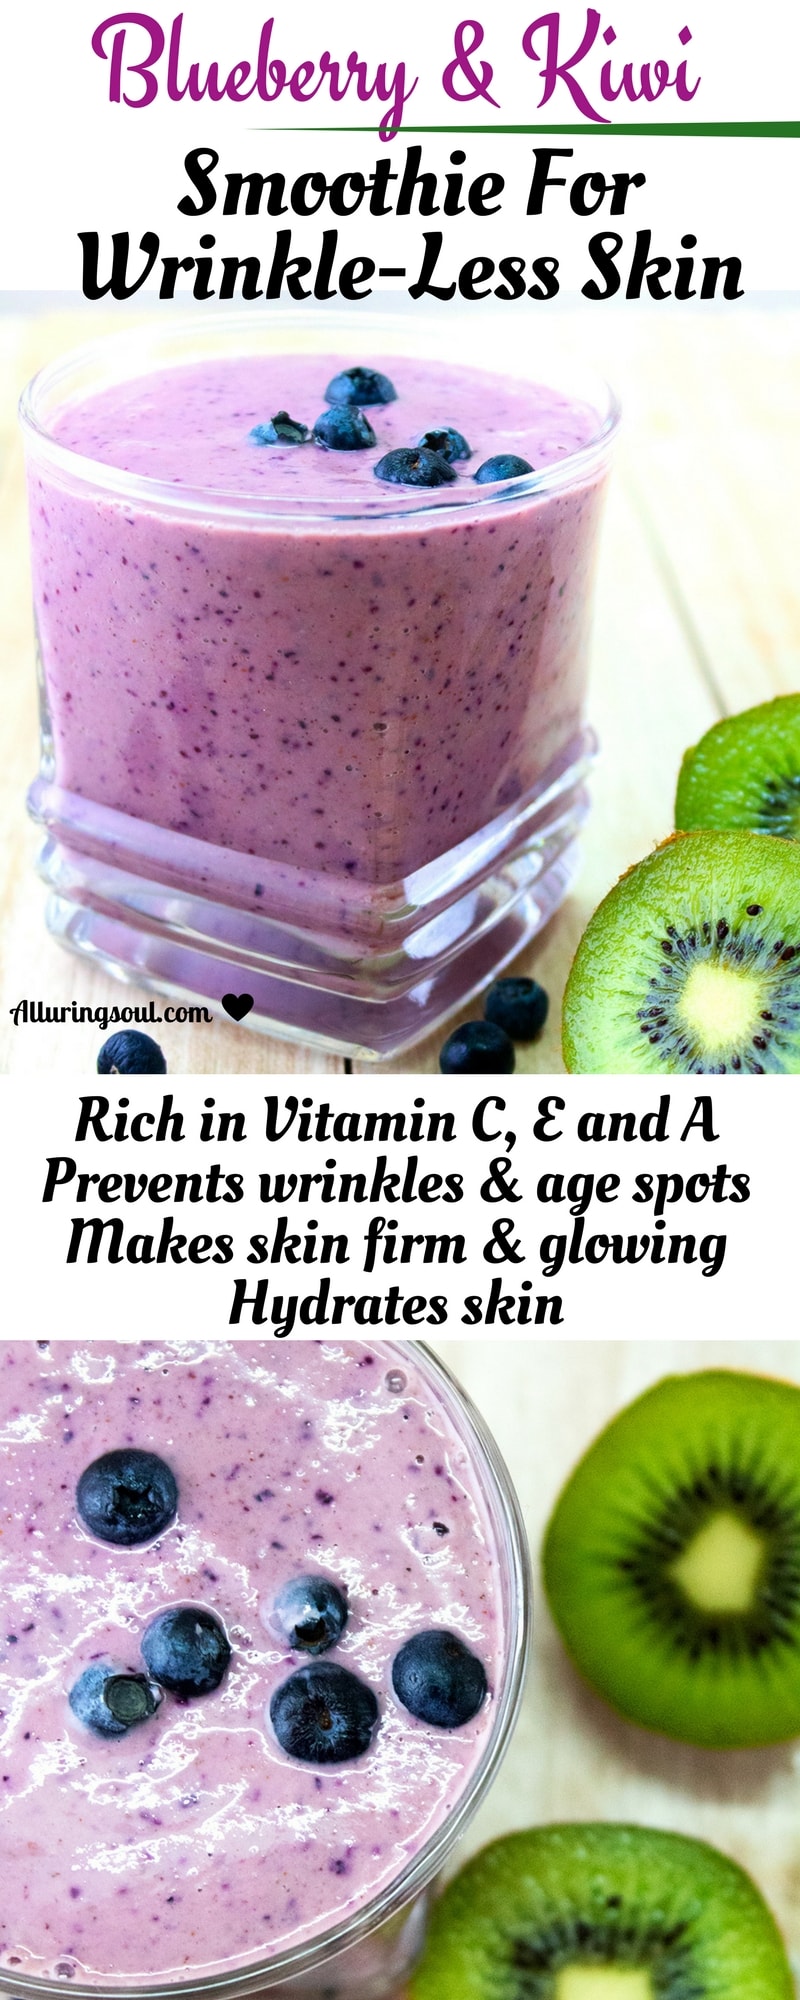 vitamin c rich blueberry and kiwi smoothie